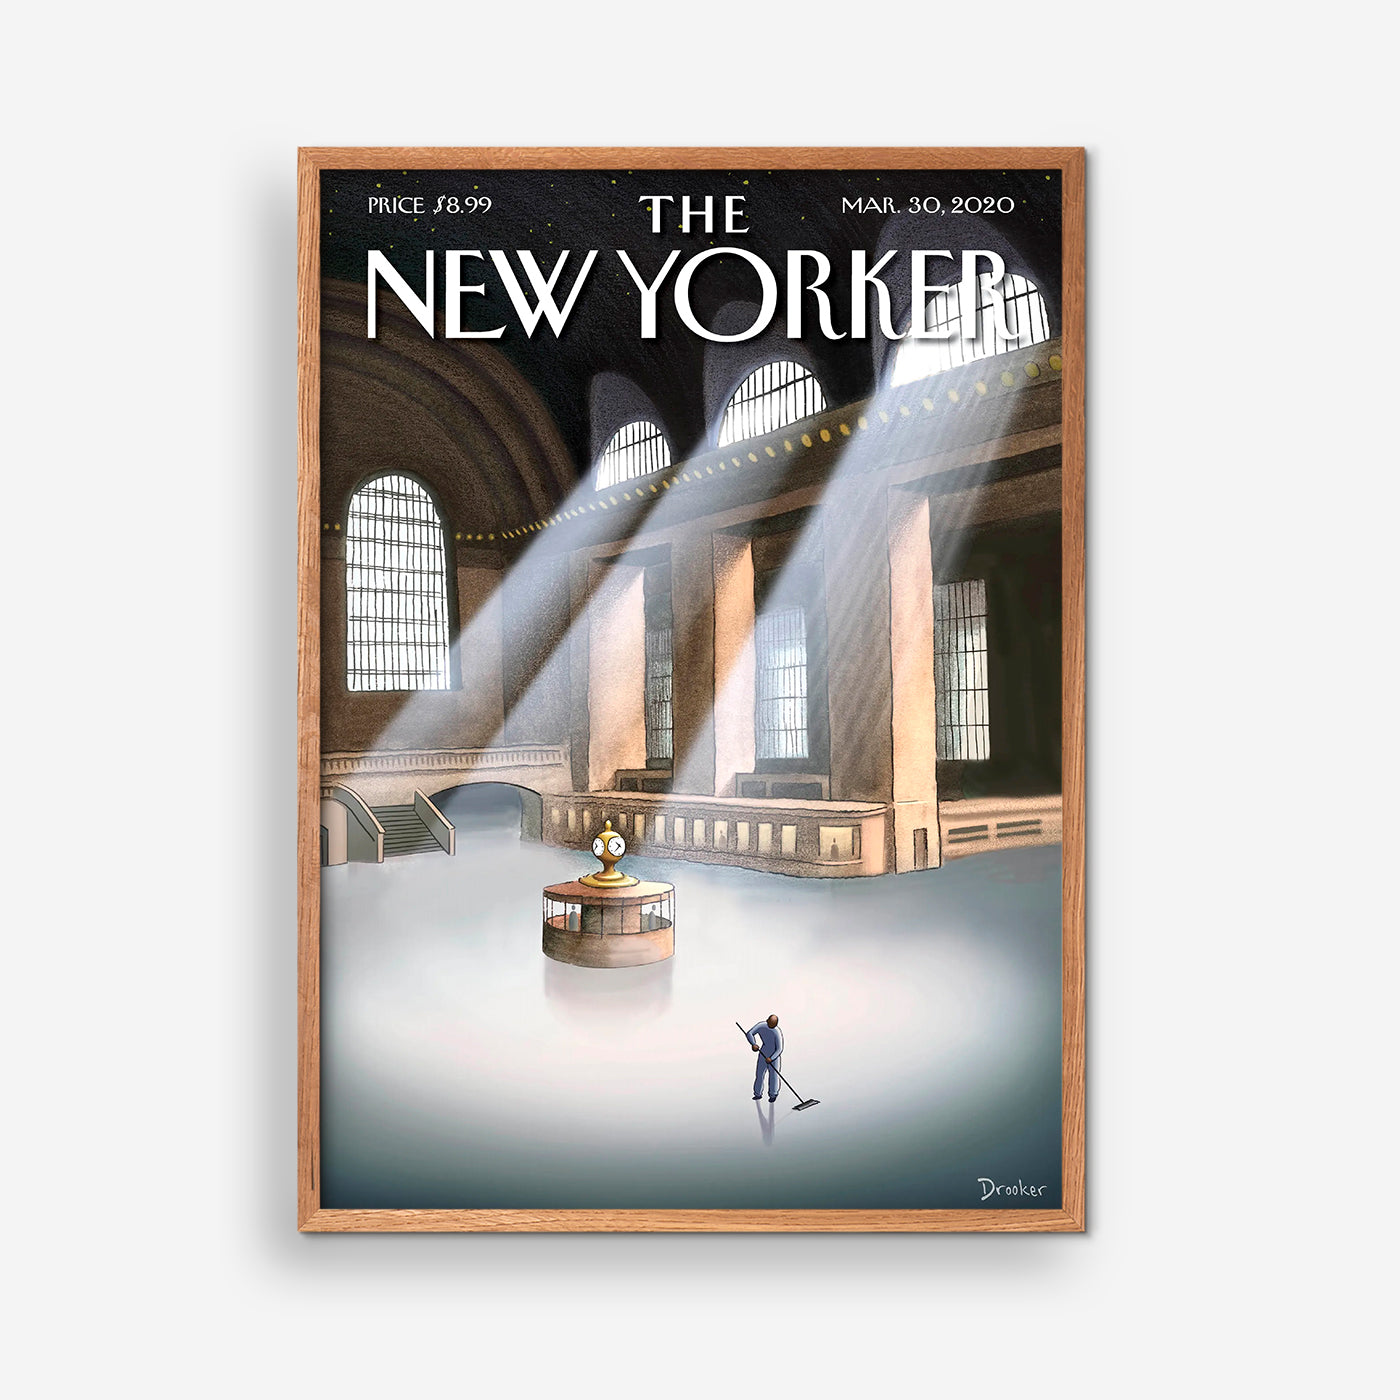 The New Yorker - Grand Central Terminal - Eric Drooker